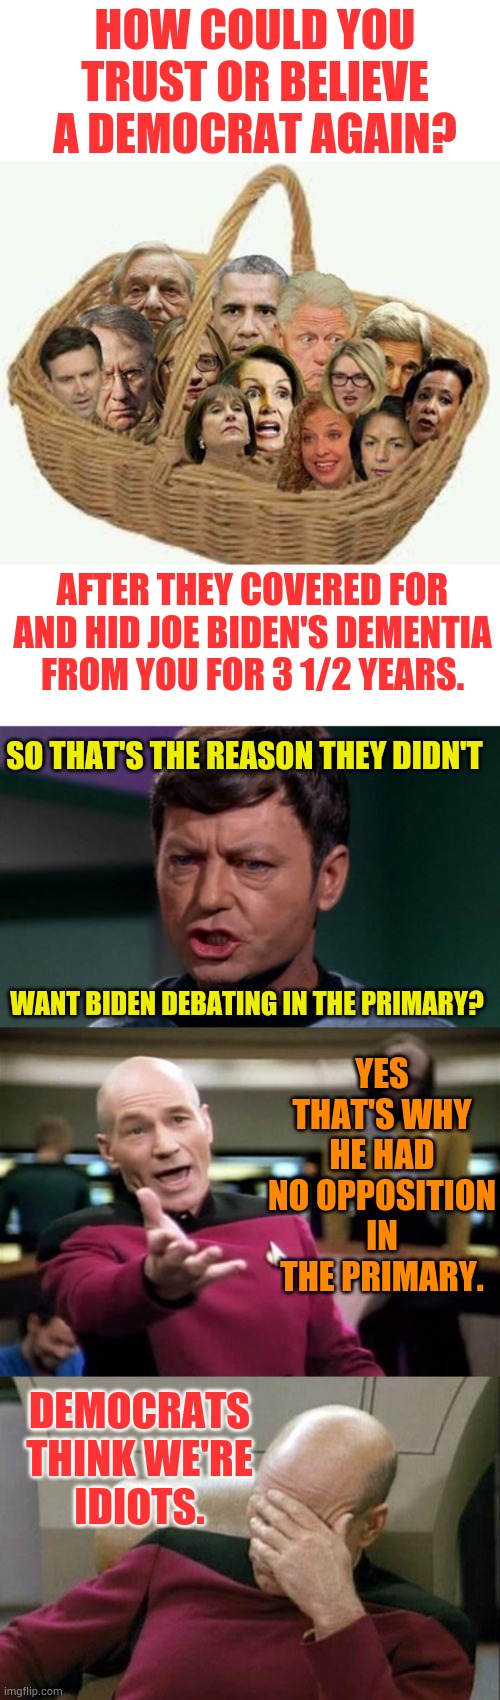 Democrats Think We're Idiots | HOW COULD YOU TRUST OR BELIEVE A DEMOCRAT AGAIN? AFTER THEY COVERED FOR AND HID JOE BIDEN'S DEMENTIA FROM YOU FOR 3 1/2 YEARS. SO THAT'S THE REASON THEY DIDN'T; YES THAT'S WHY HE HAD NO OPPOSITION IN THE PRIMARY. WANT BIDEN DEBATING IN THE PRIMARY? DEMOCRATS THINK WE'RE IDIOTS. | image tagged in memes,captain picard facepalm,democrats,public,idiots,politics | made w/ Imgflip meme maker